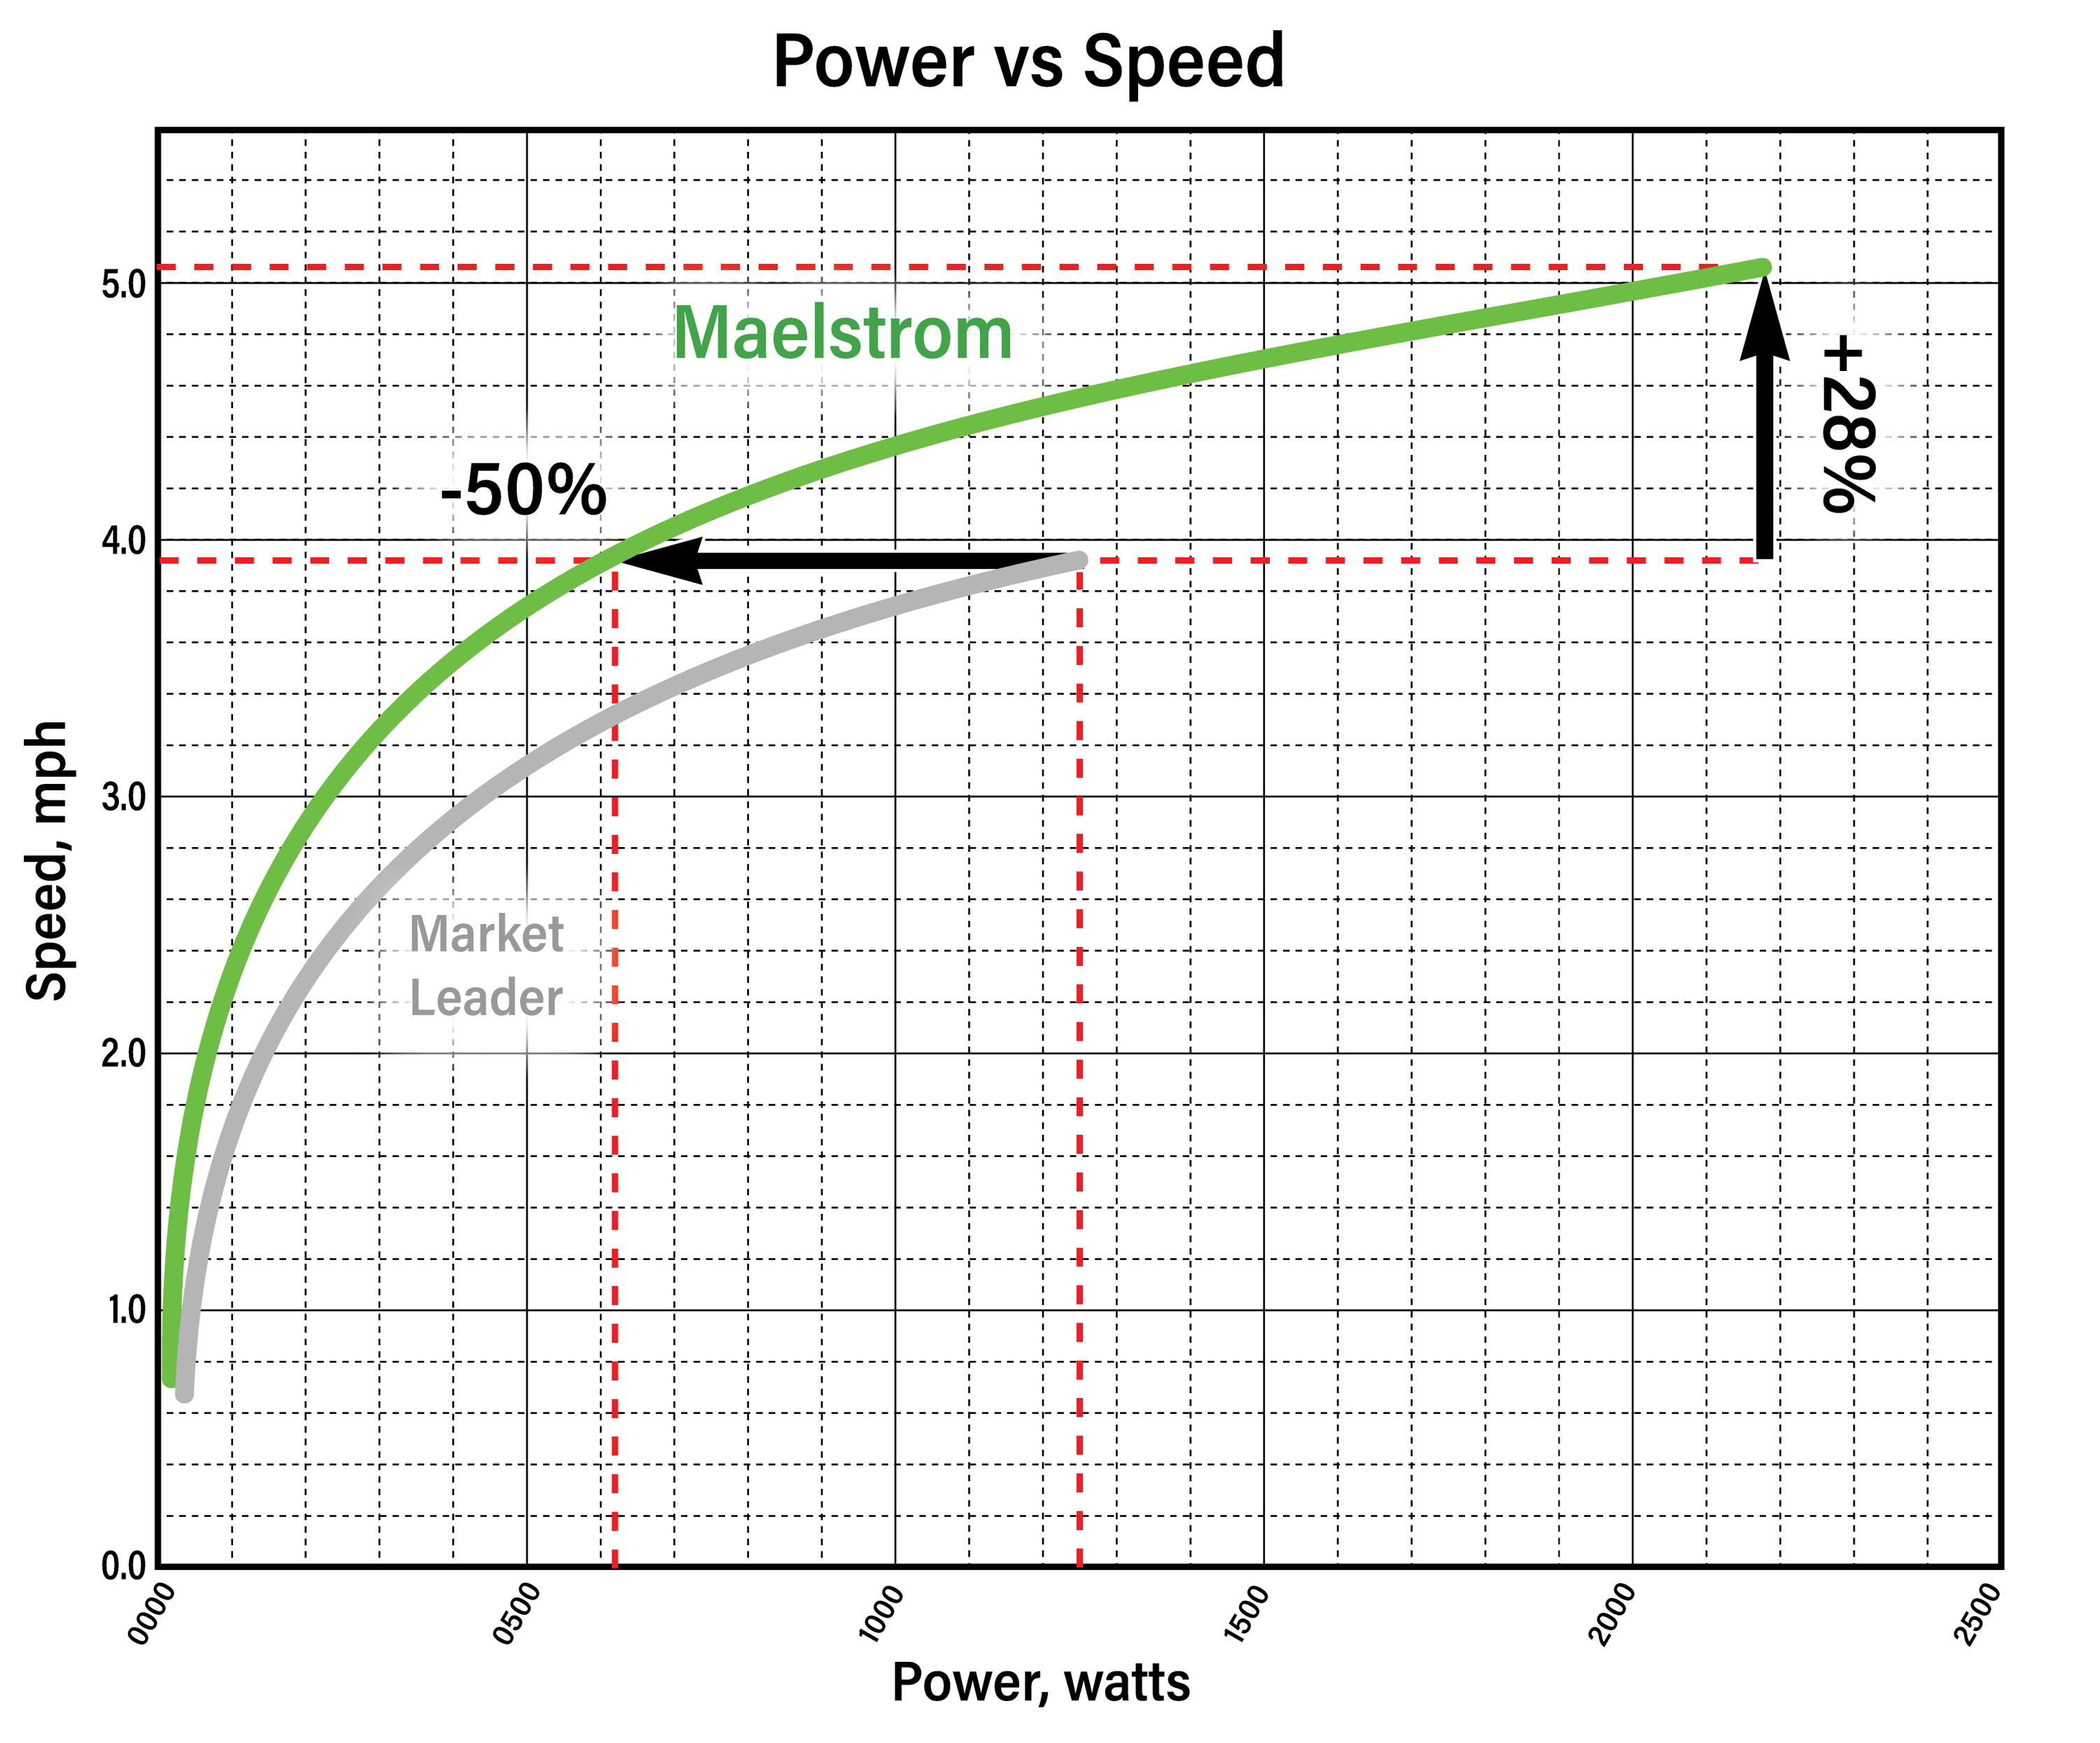 Maelstrom Power vs Speed graph, showing our improvements over the market leader